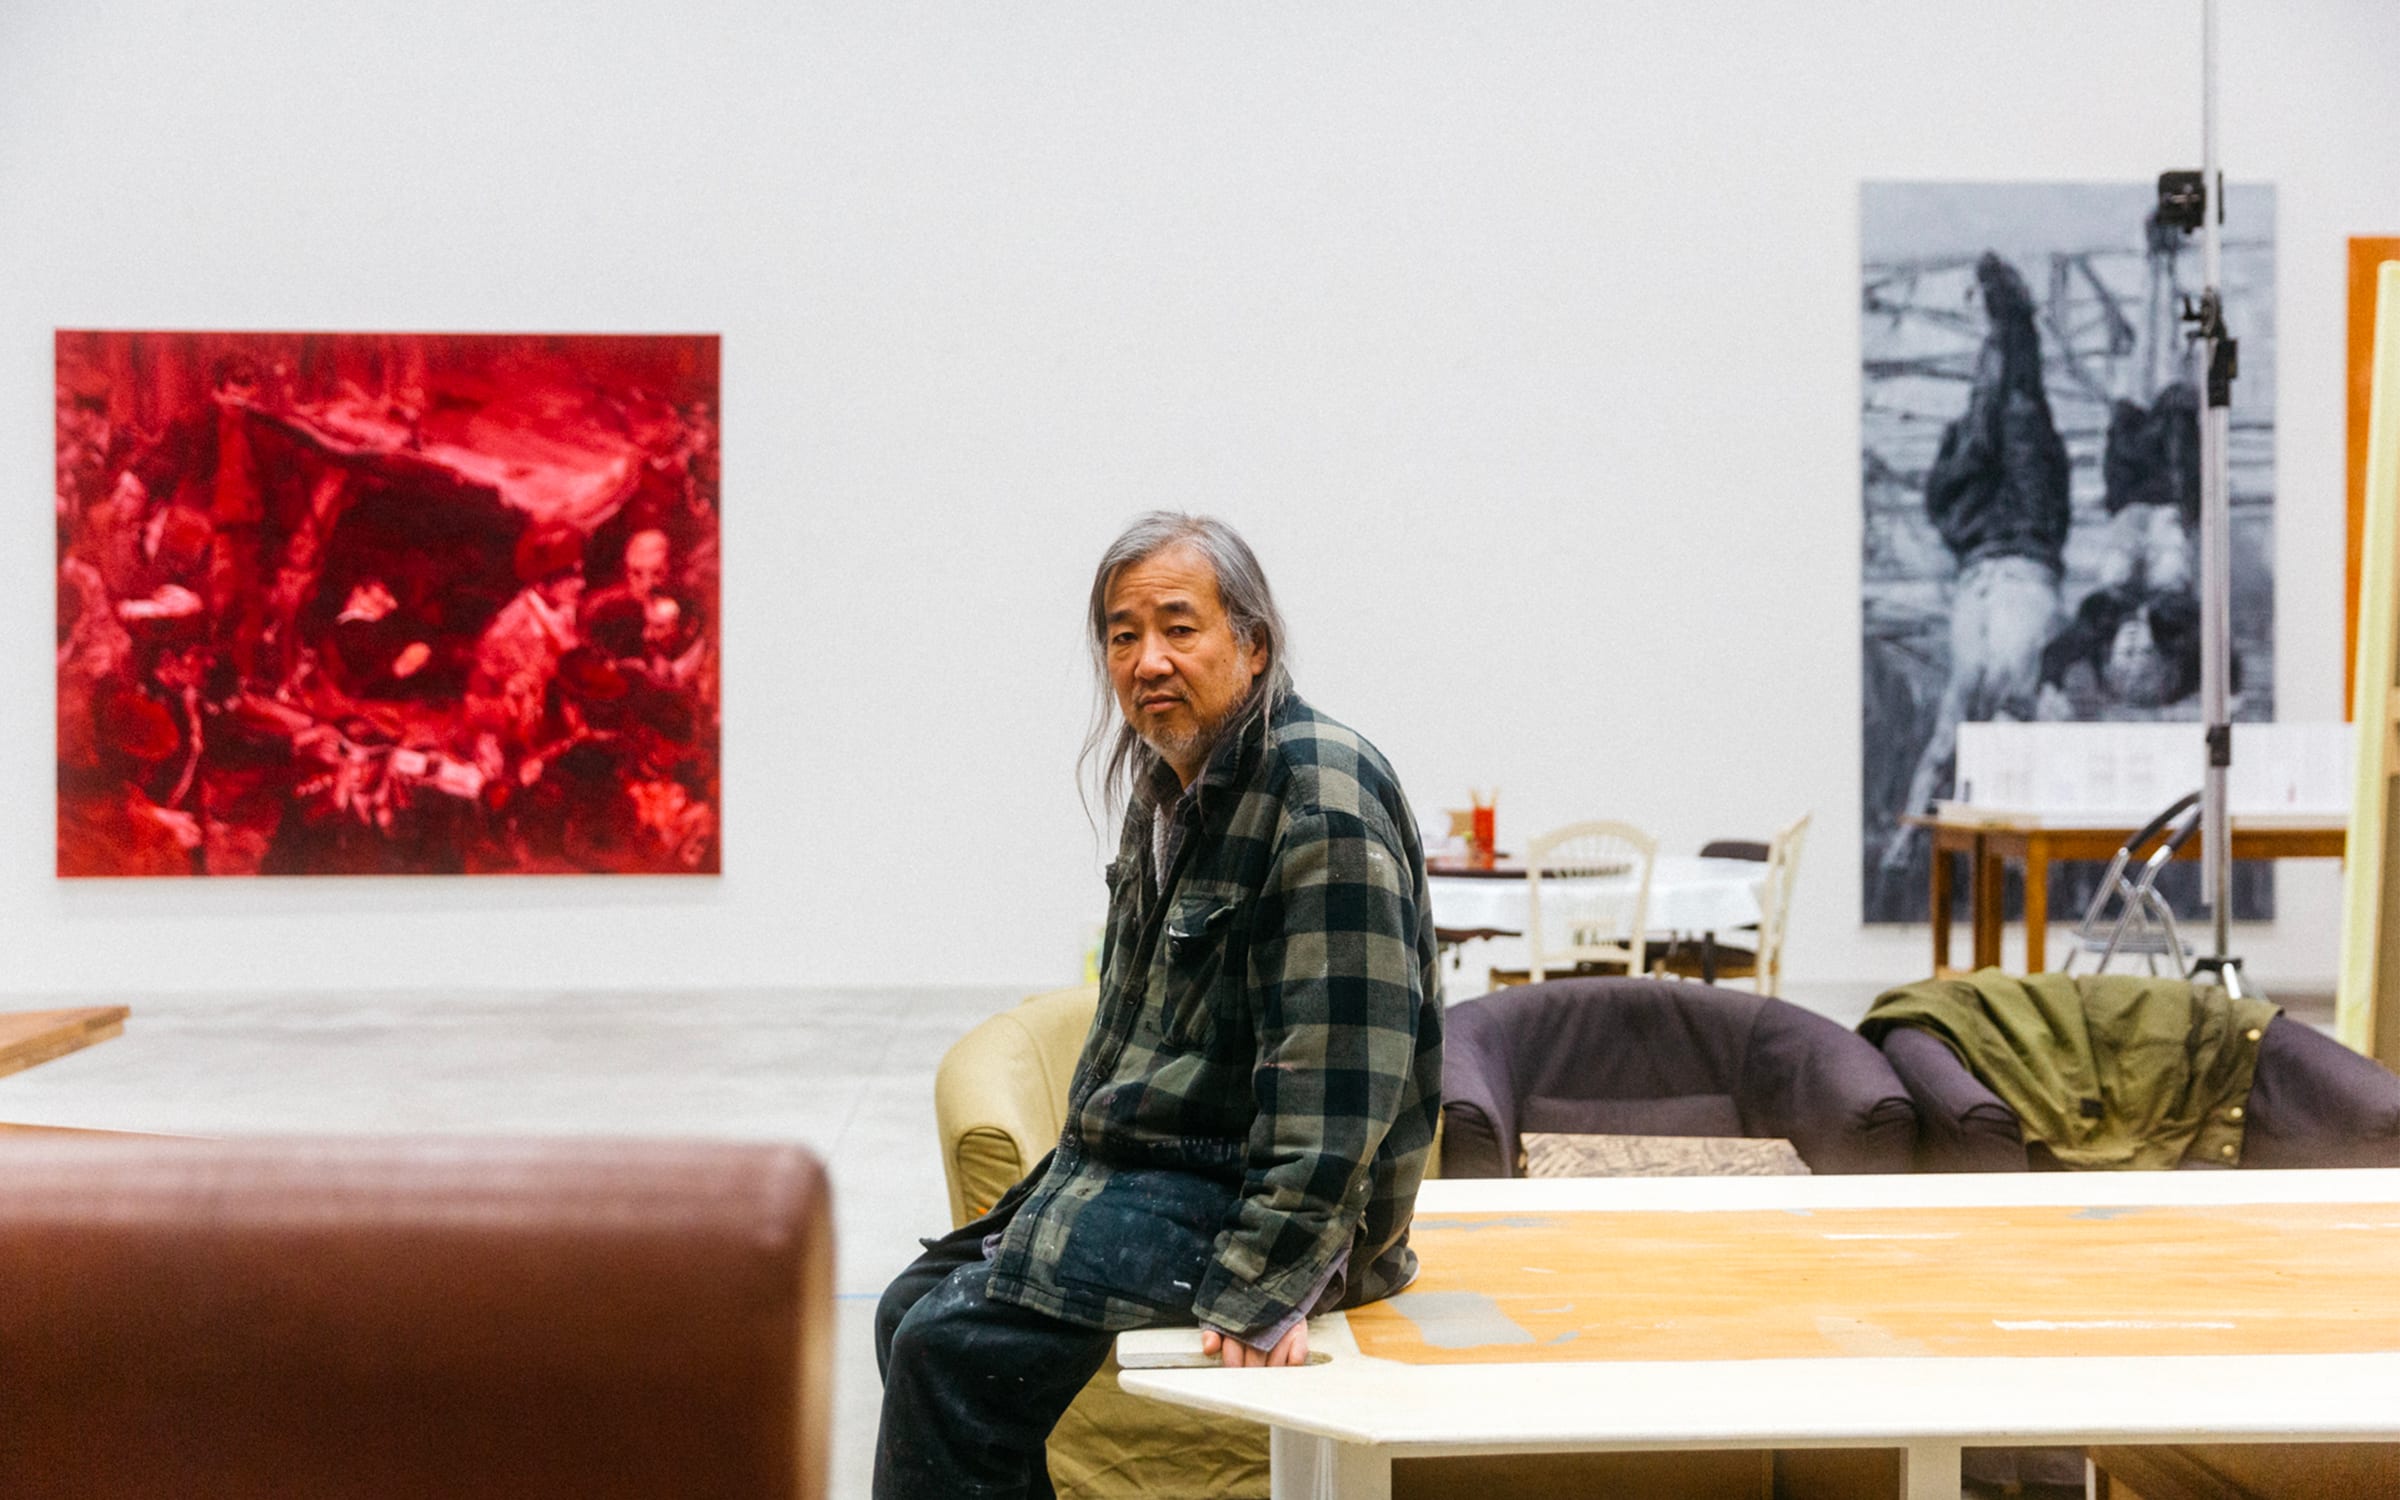 For Yan Pei-Ming, painting humanity’s many faces is a lifelong project ...